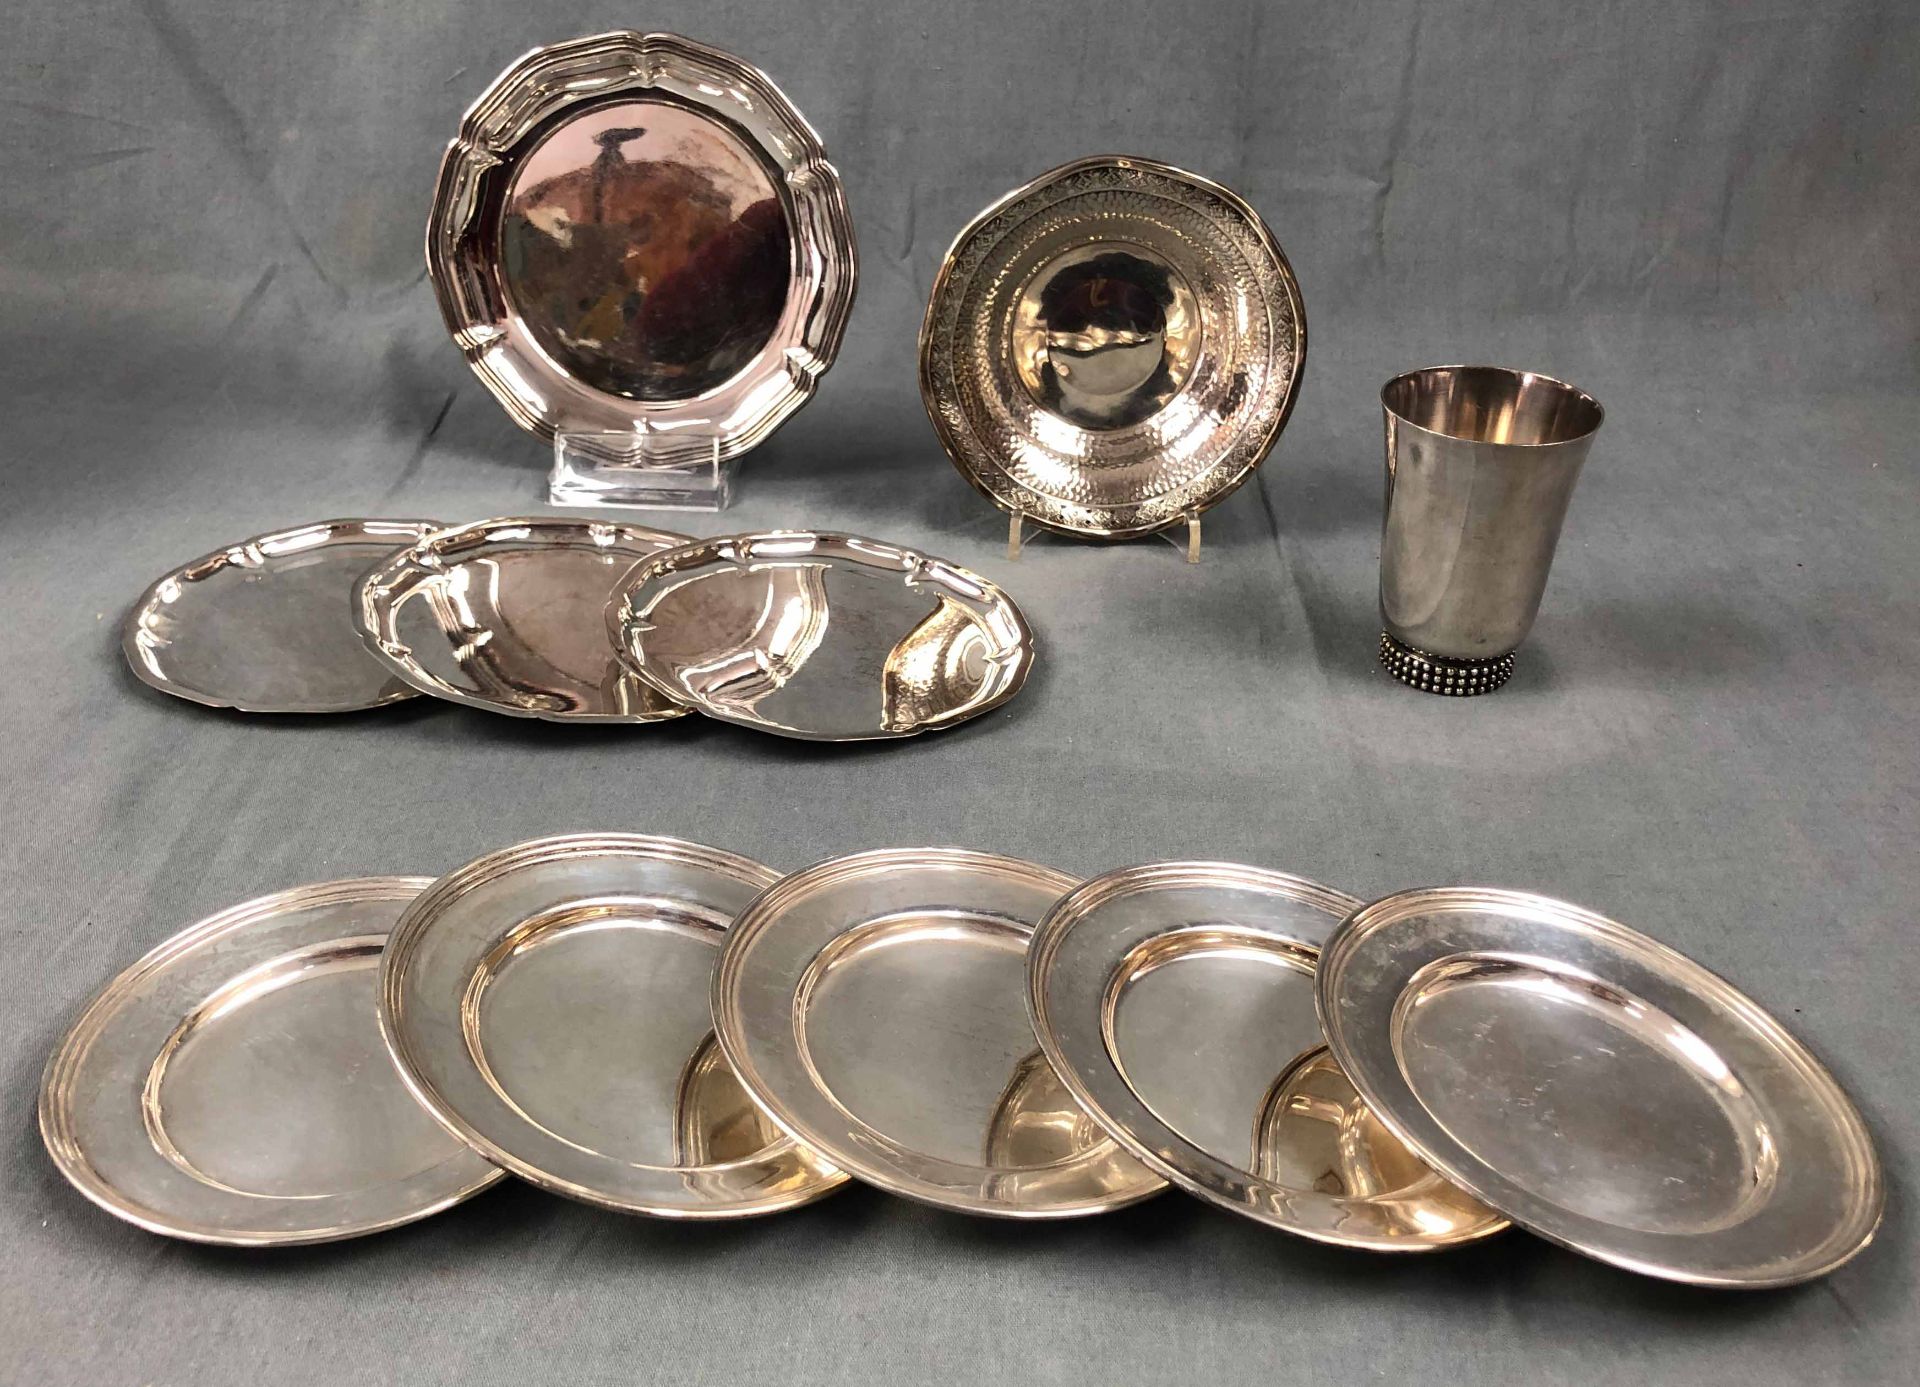 9 plates, 1 bowl and a cup, silver 925. Sterling.665 grams. Up to 17 cm in diameter, hallmarks.9